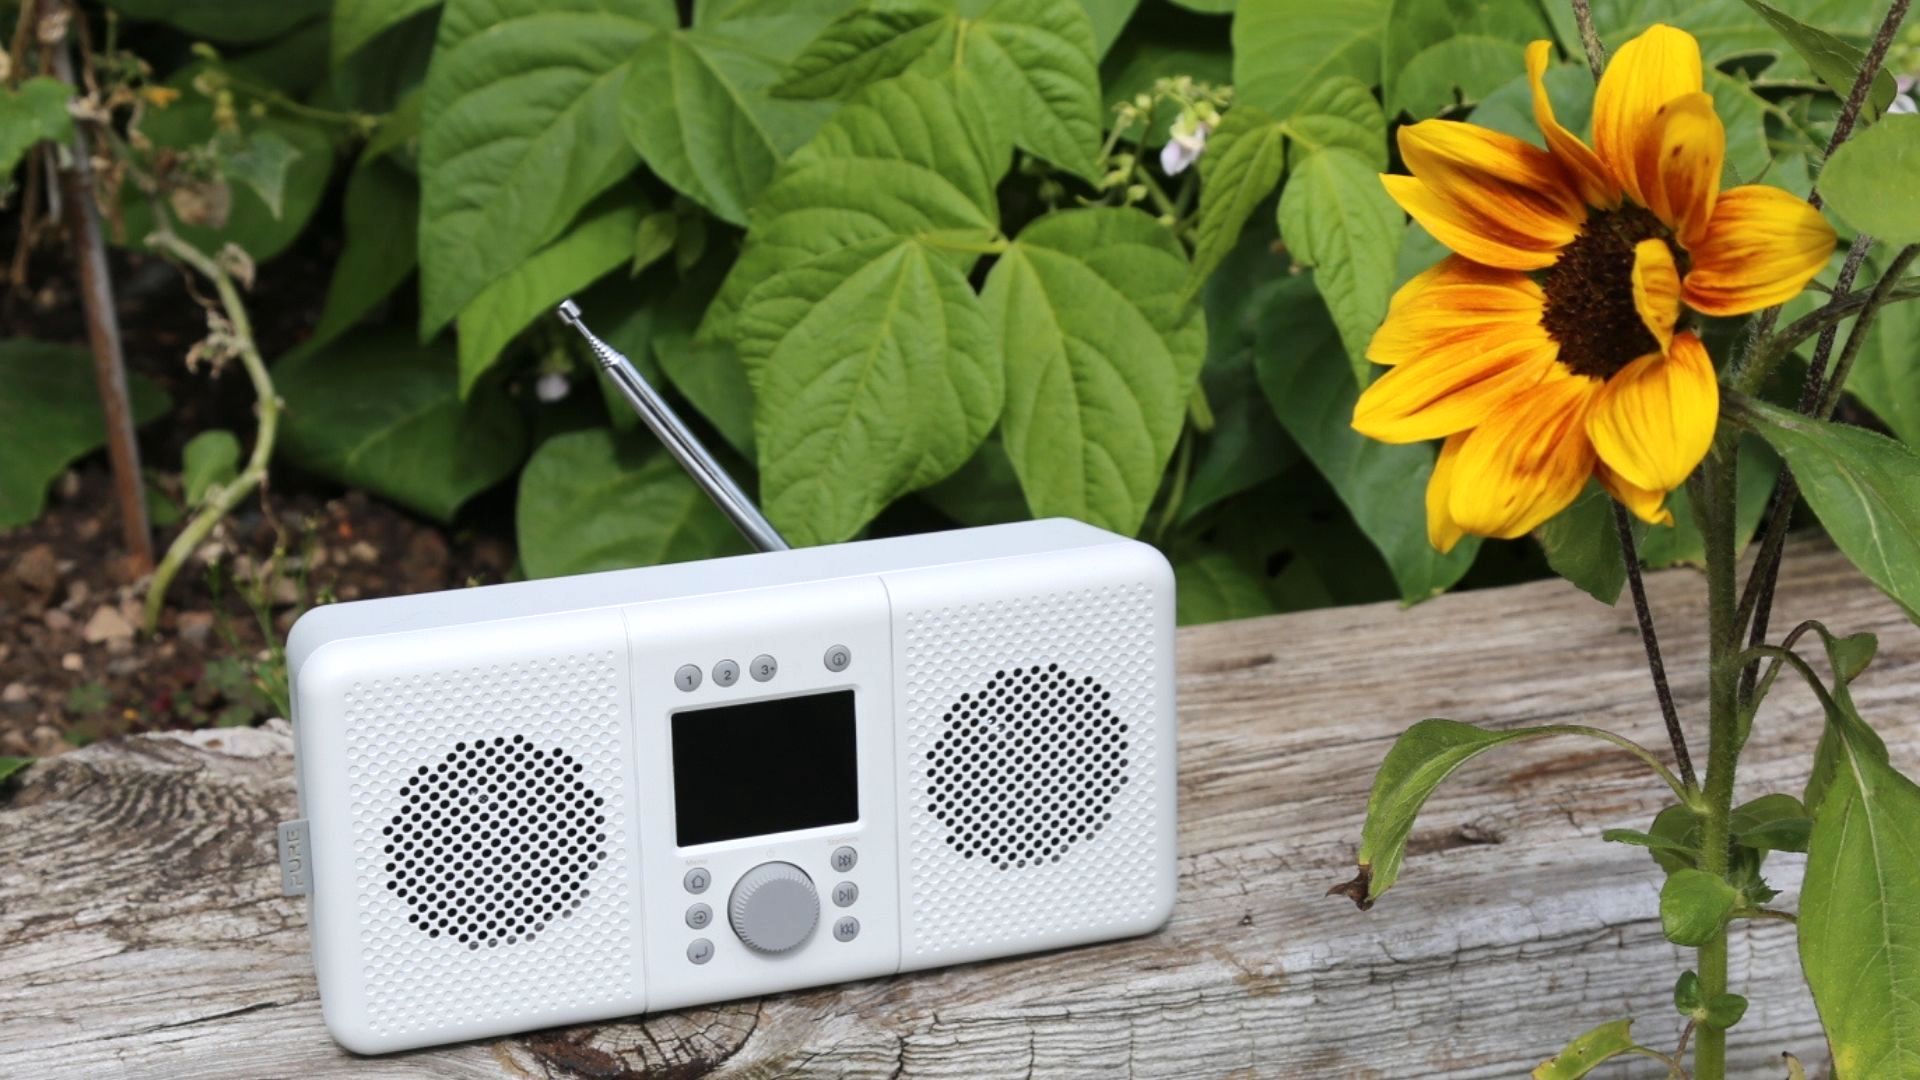 the pure elan connect+ dab radio next to a sunflower